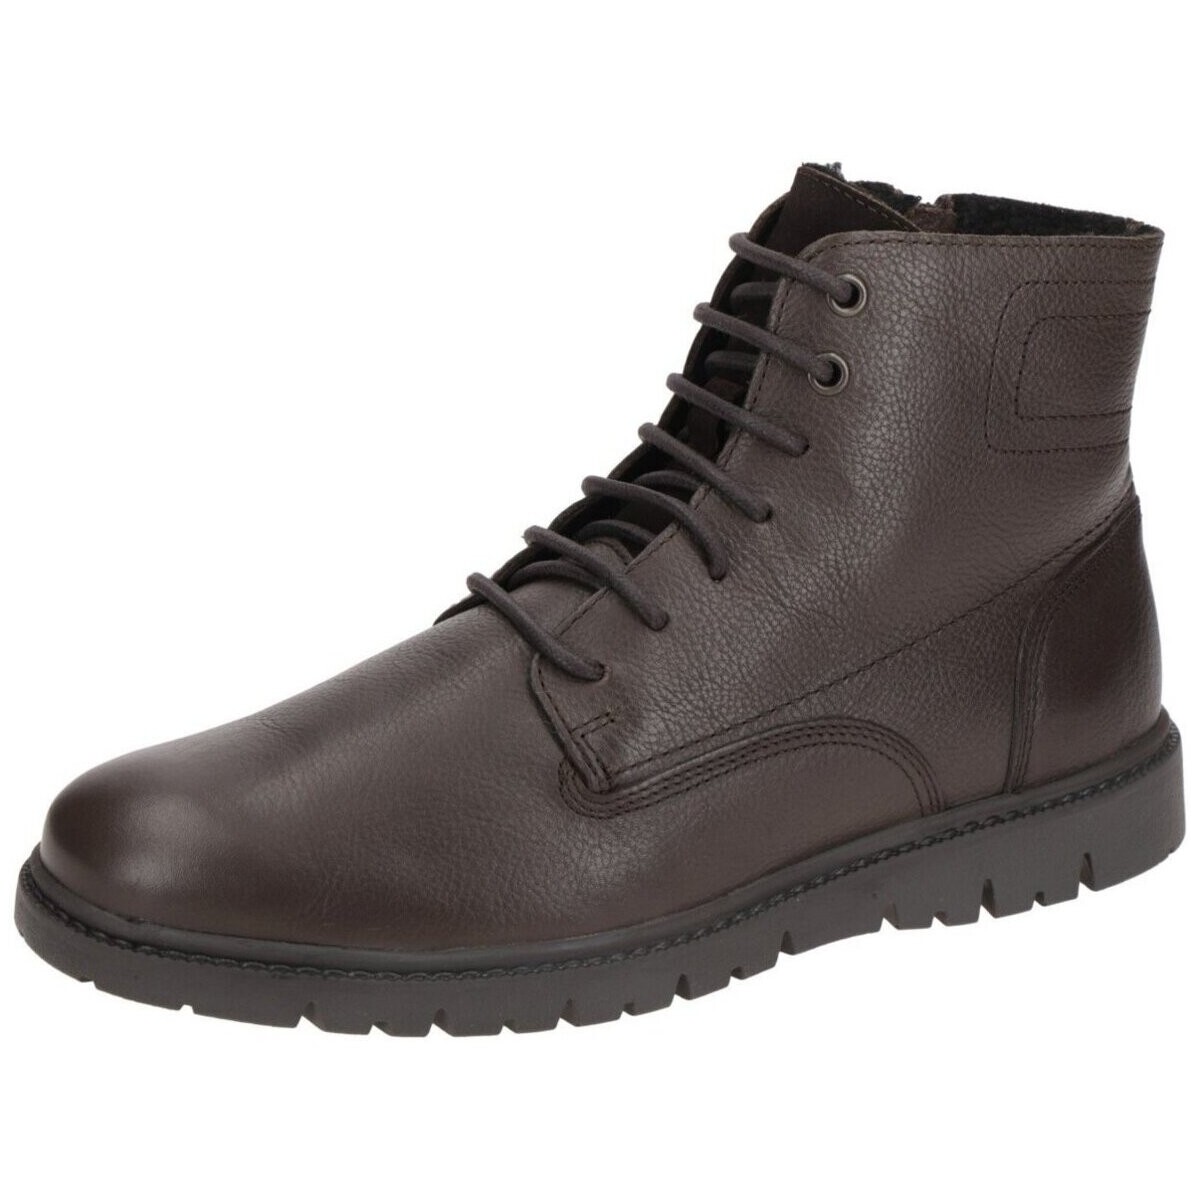 Chaussures Homme Bottes Geox  Marron